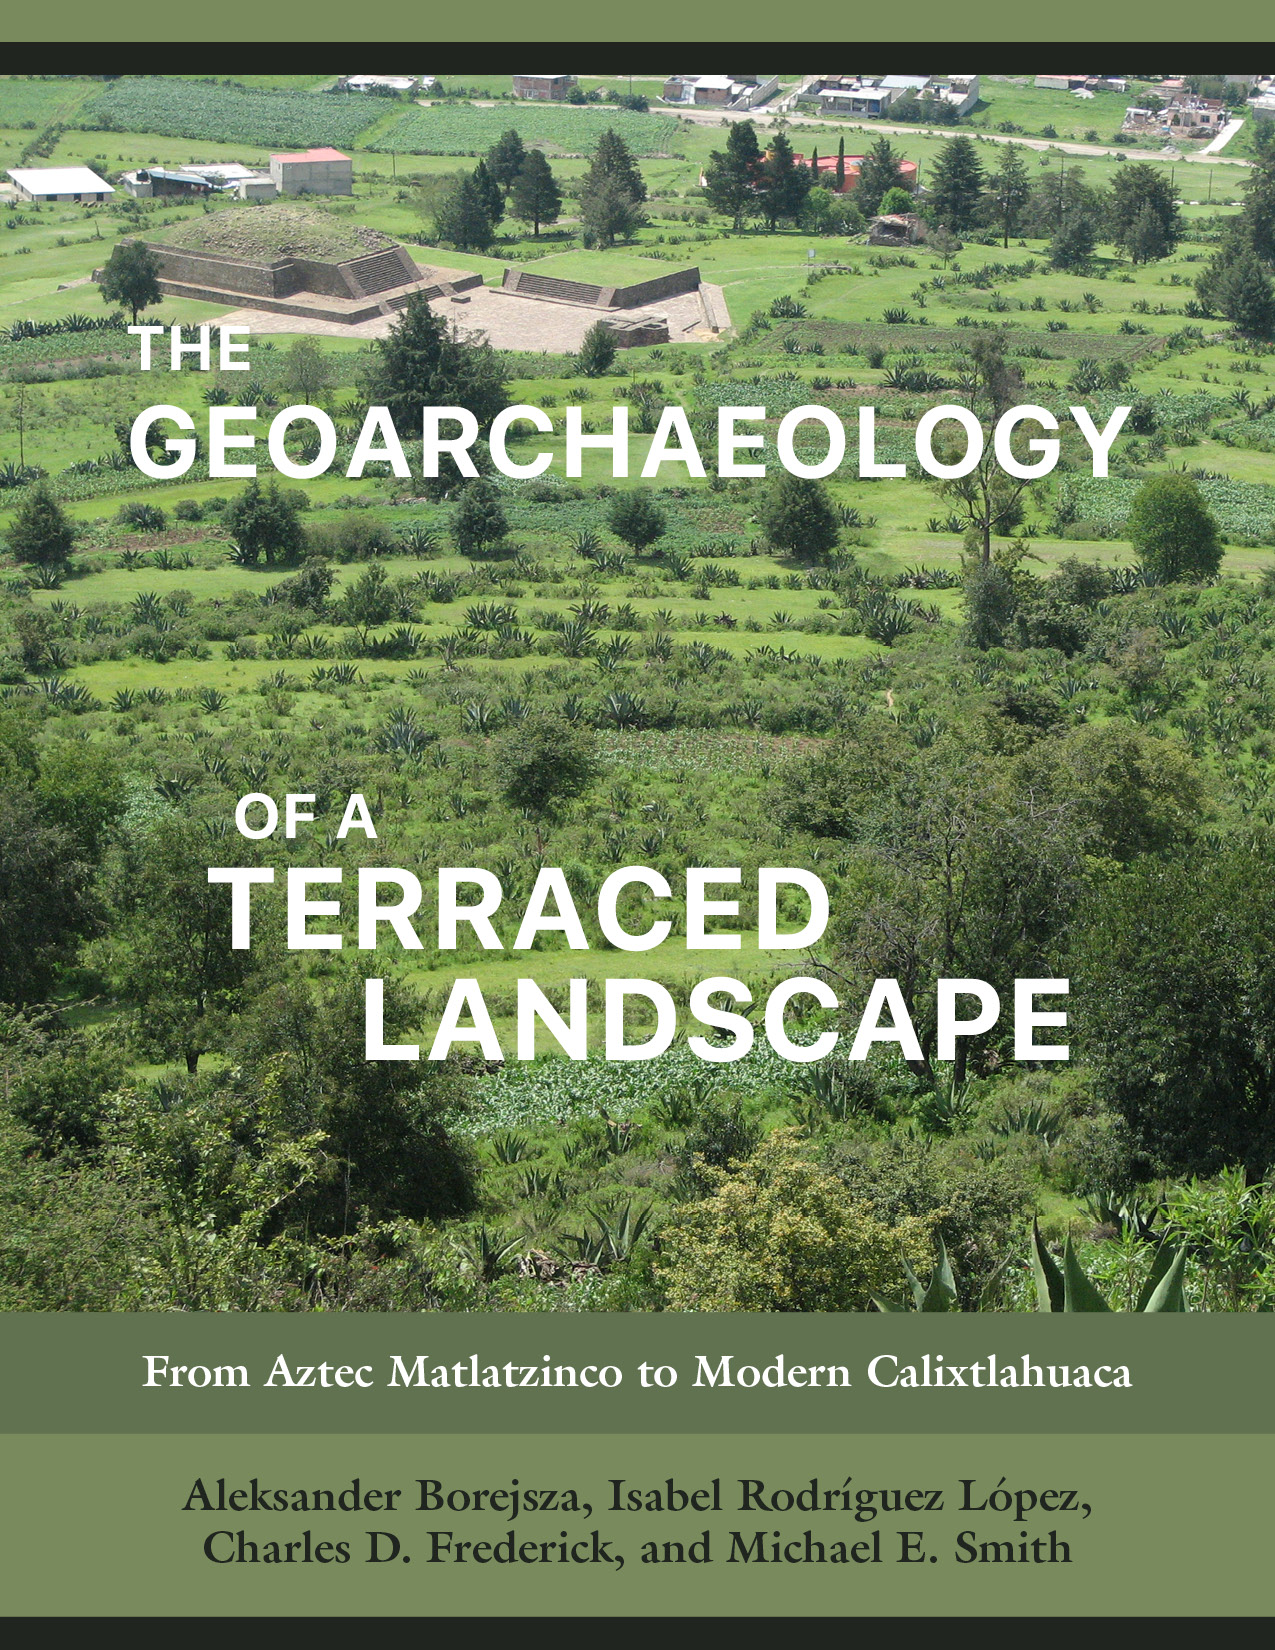 Book Cover for "The Geoarchaeology of A Terraced Landscape" the image is of central Mexico 